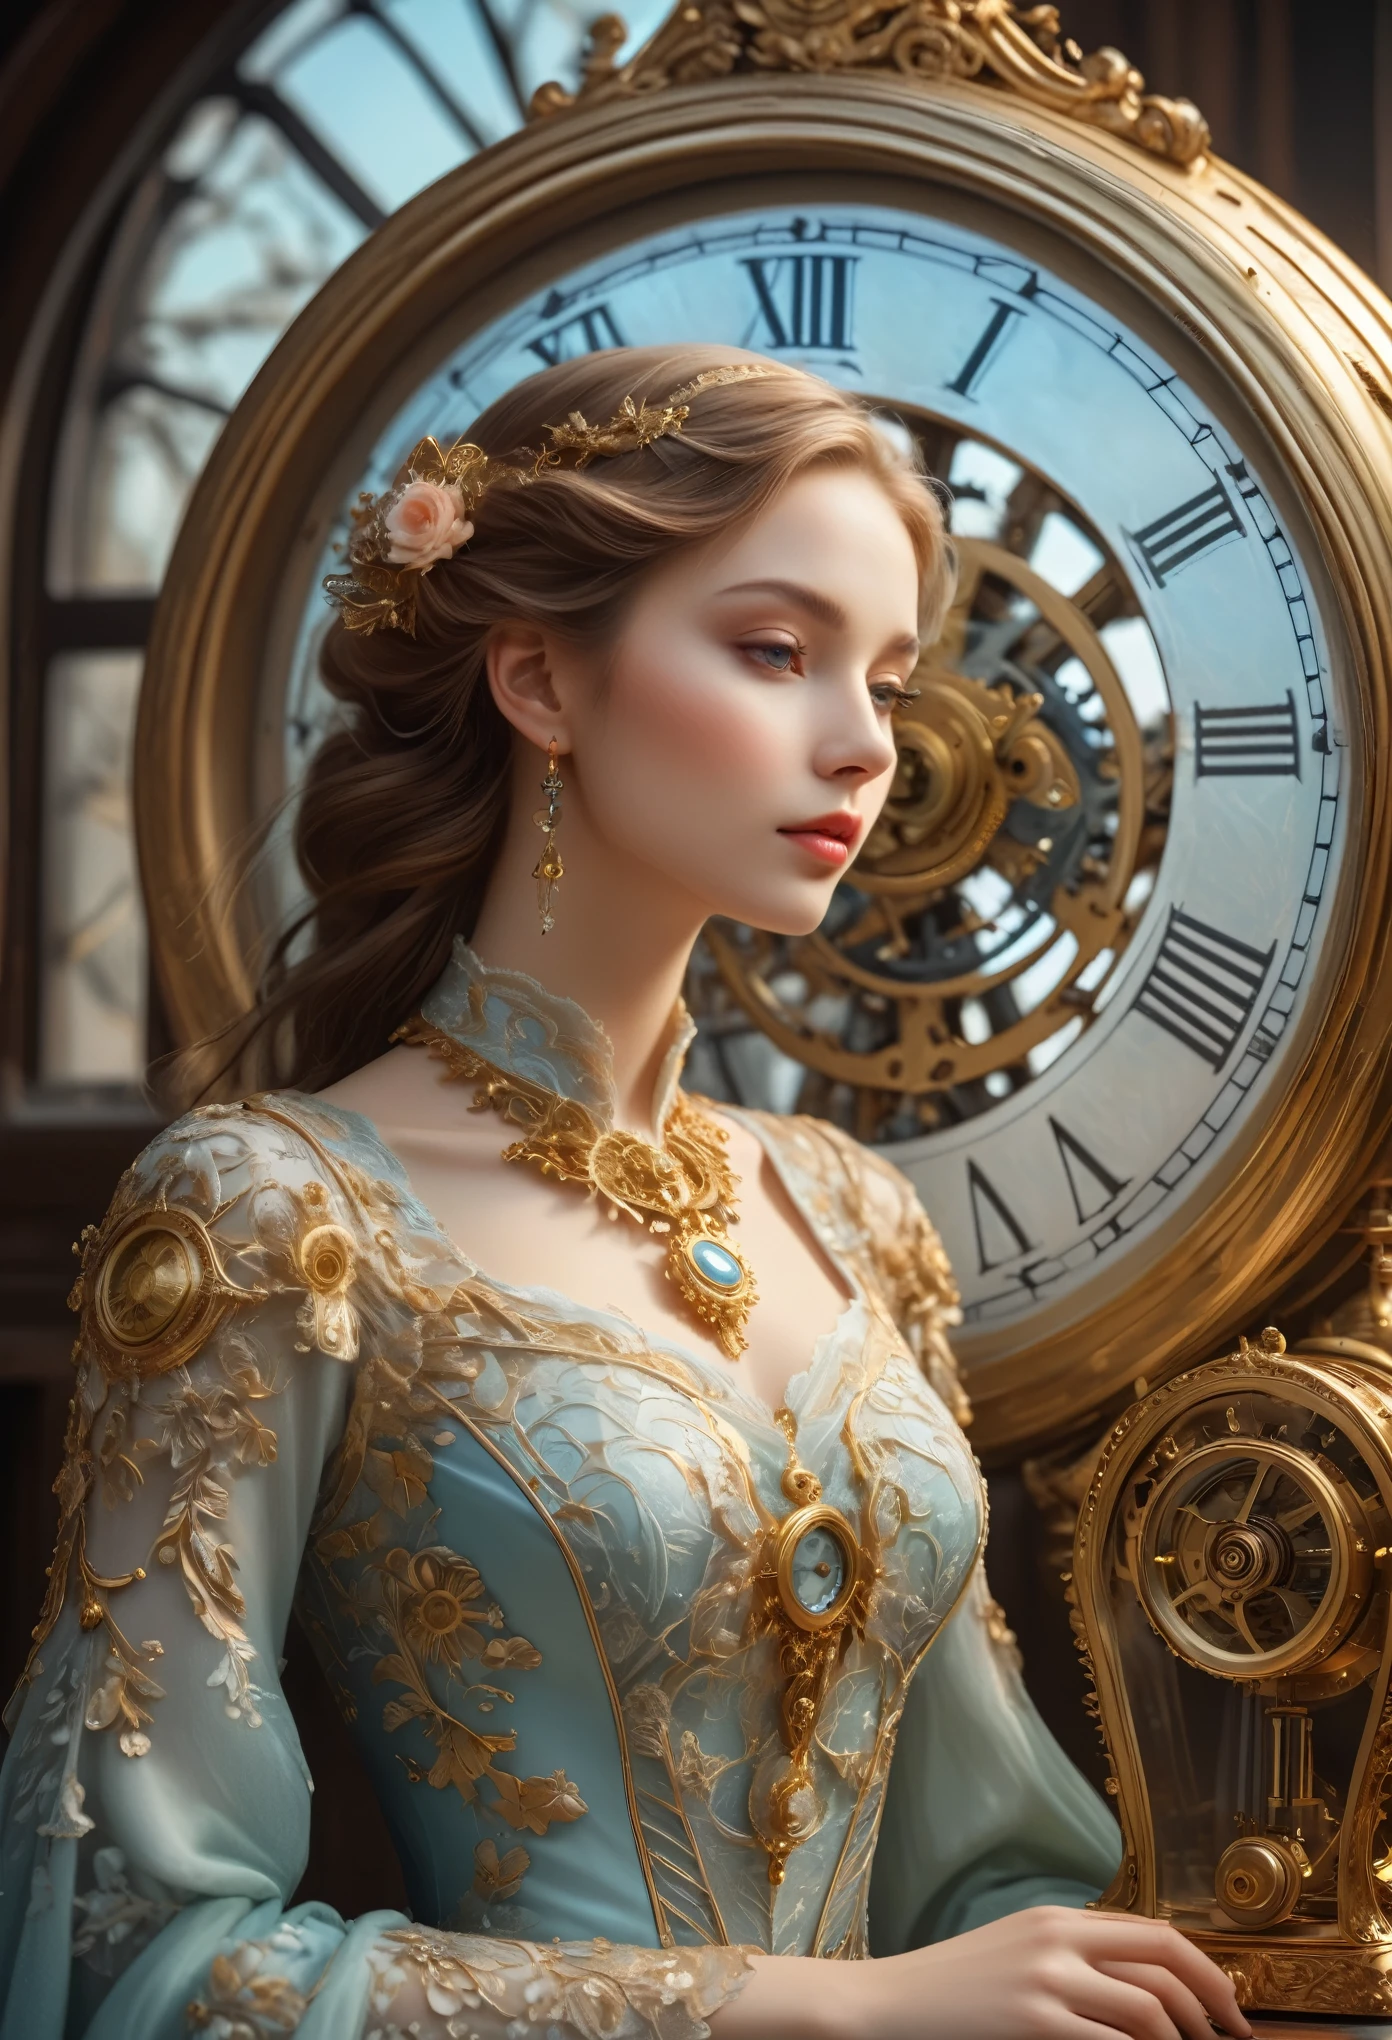 (best quality,4k,8k,highres,masterpiece:1.2),ultra-detailed,(realistic,photorealistic,photo-realistic:1.37),intricate mechanism of a mechanical clock, dreamlike atmosphere, world's most beautiful girl, fine illustrations, antique gold and brass material, enchanting lighting, delicate gears, intricate clock hands, exquisite clockwork details, mesmerizing mechanical movements, magical aura, ethereal beauty, magical ambiance, delicate porcelain skin, captivating expression, elegant attire, graceful posture, intricate lace patterns, soft pastel colors, enchanting background scenery, whimsical storytelling, mysterious and enchanting storyline, suspenseful plot, magical charm, vivid and dynamic brushstrokes